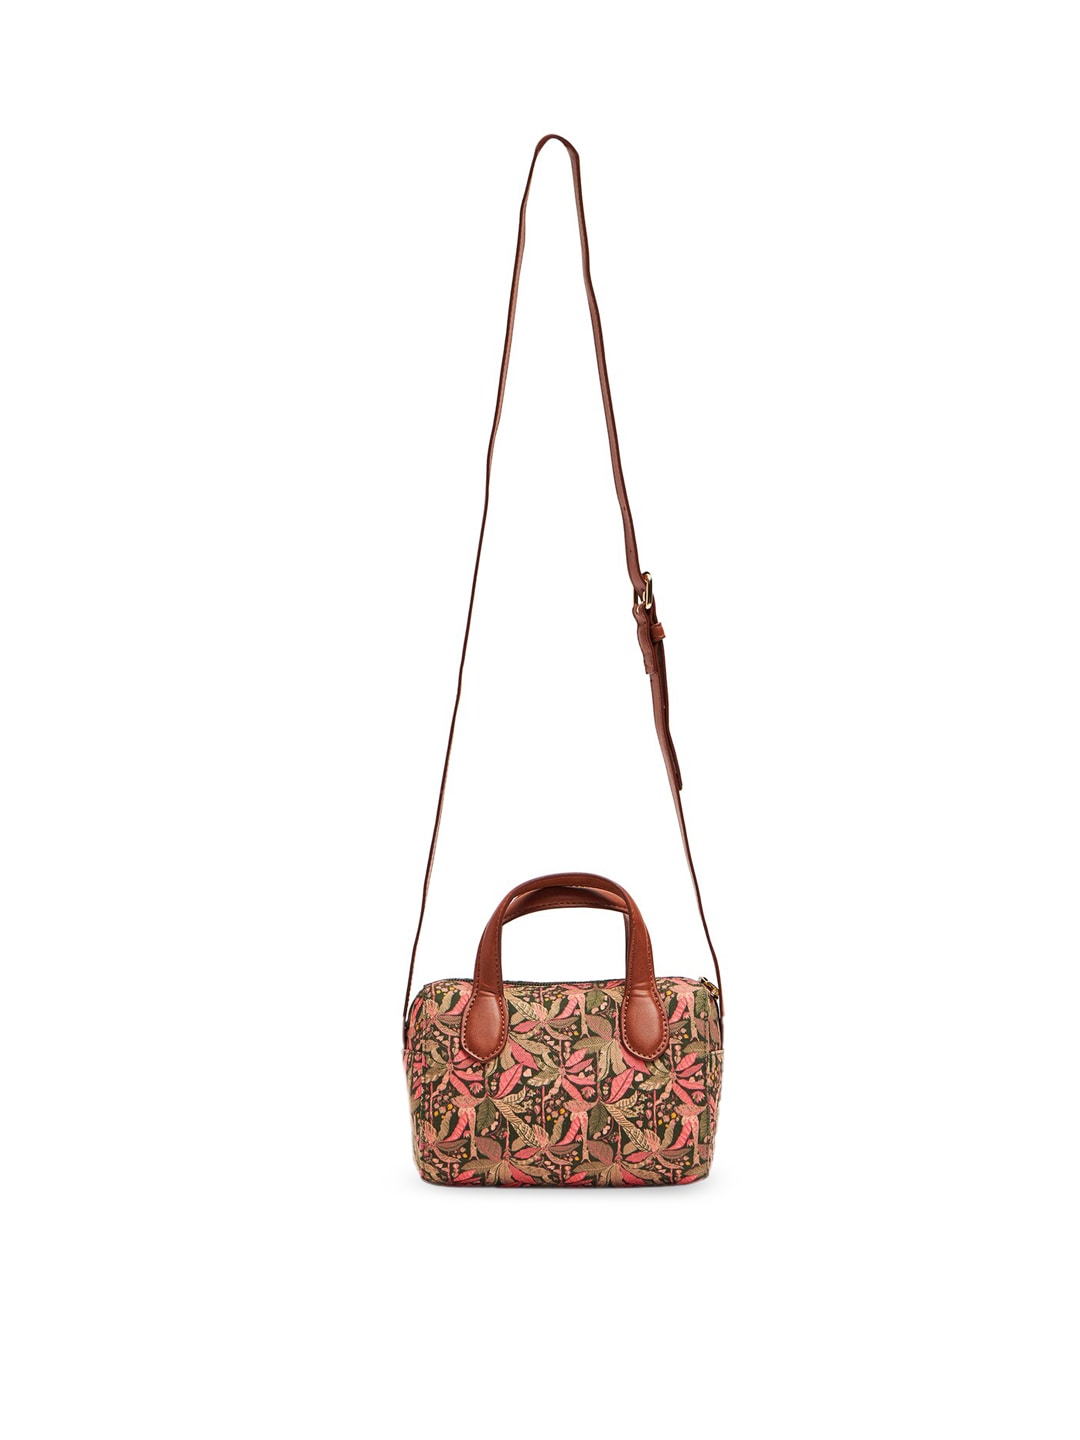 Chumbak Olive Green Floral PU Structured Sling Bag Price in India